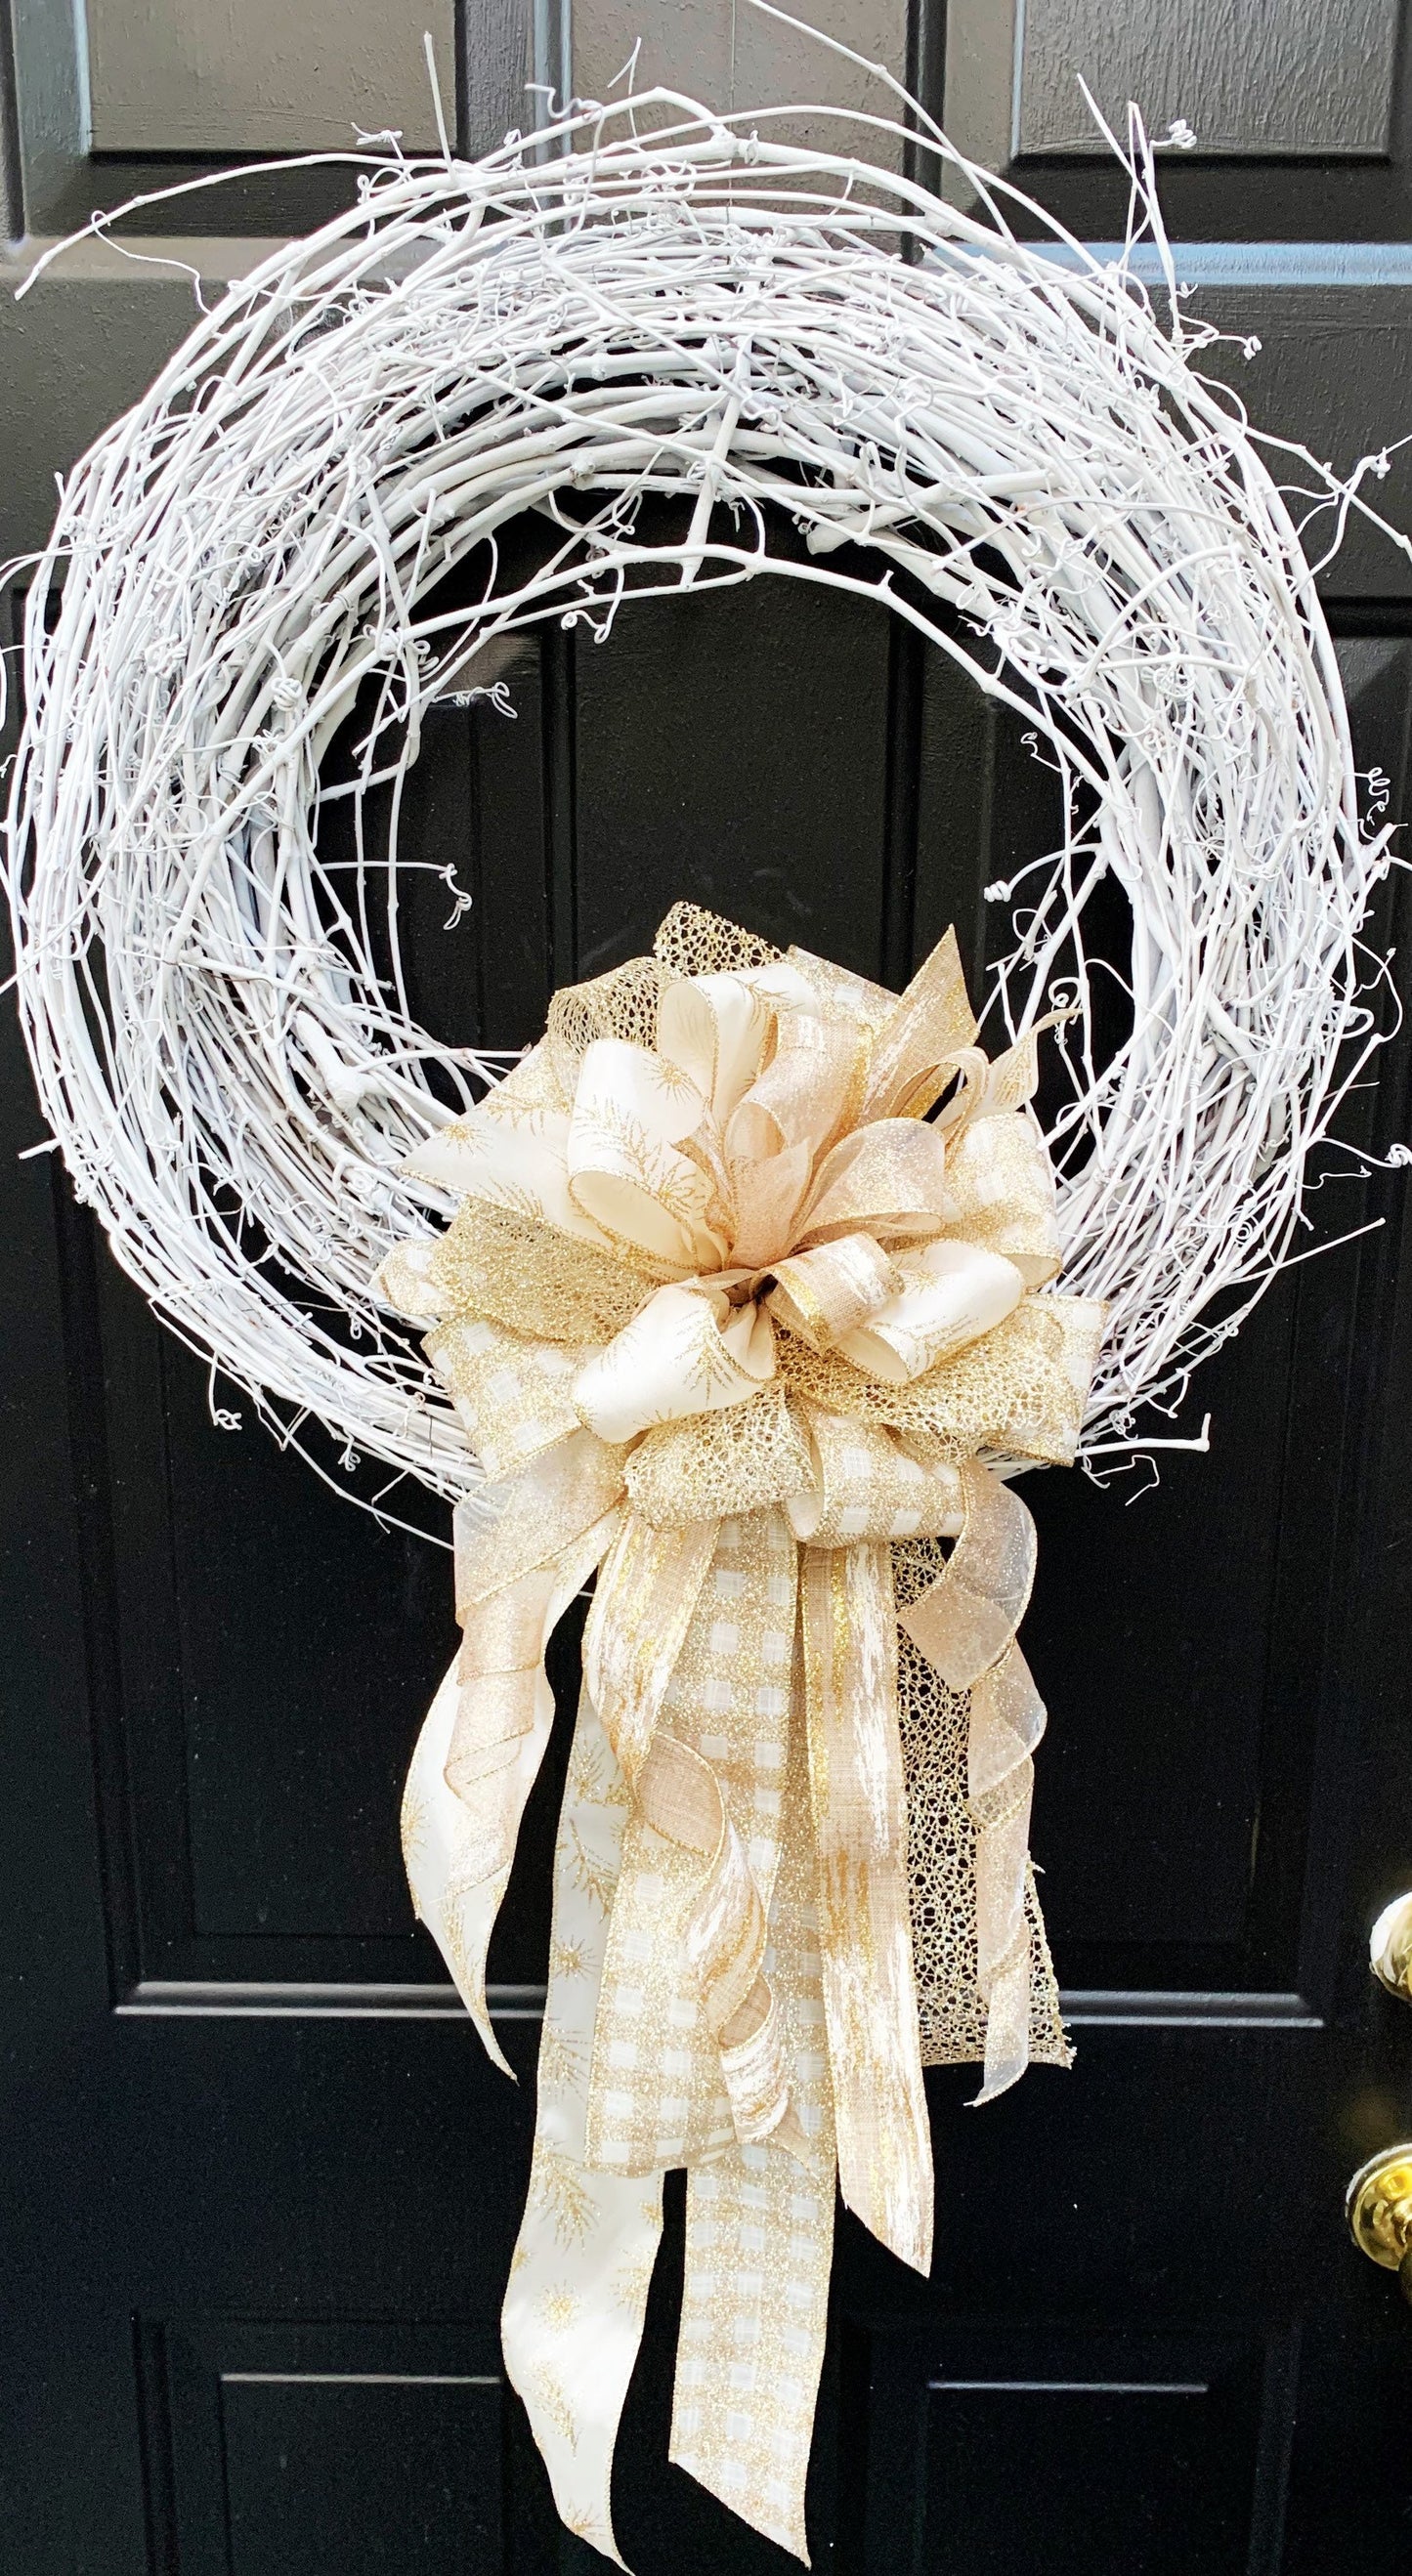 Everyday Collection - Gold Bow, Gold, Bow, Bows, Holiday, Holiday Bow, Gold Holiday Bow, Wedding Bow, Wedding, Mailbox Bow, Wreath Bow